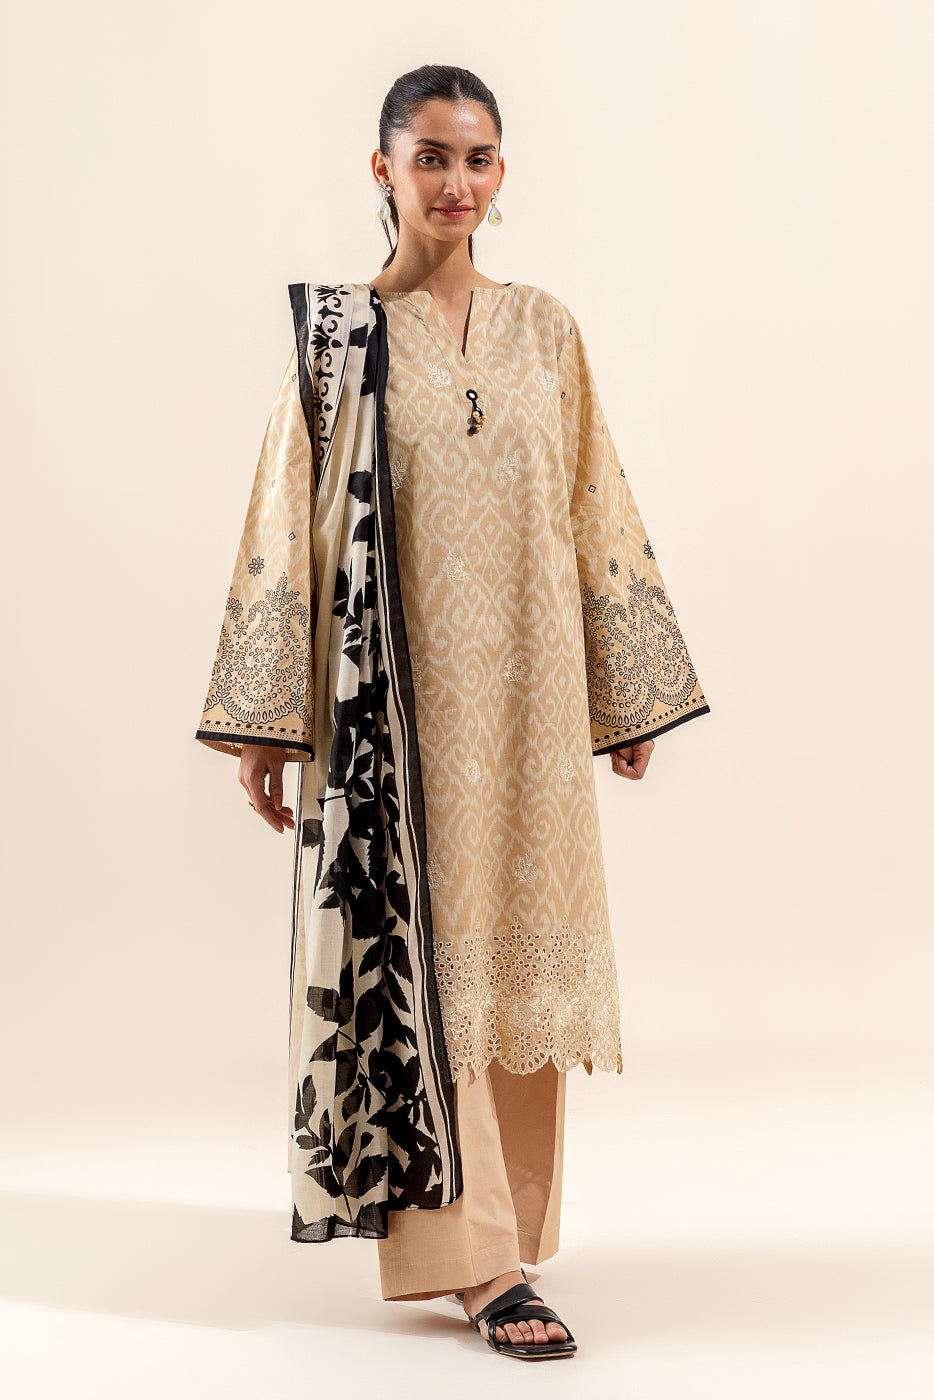 3 PIECE EMBROIDERED LAWN SUIT-ONYX PALE (UNSTITCHED)